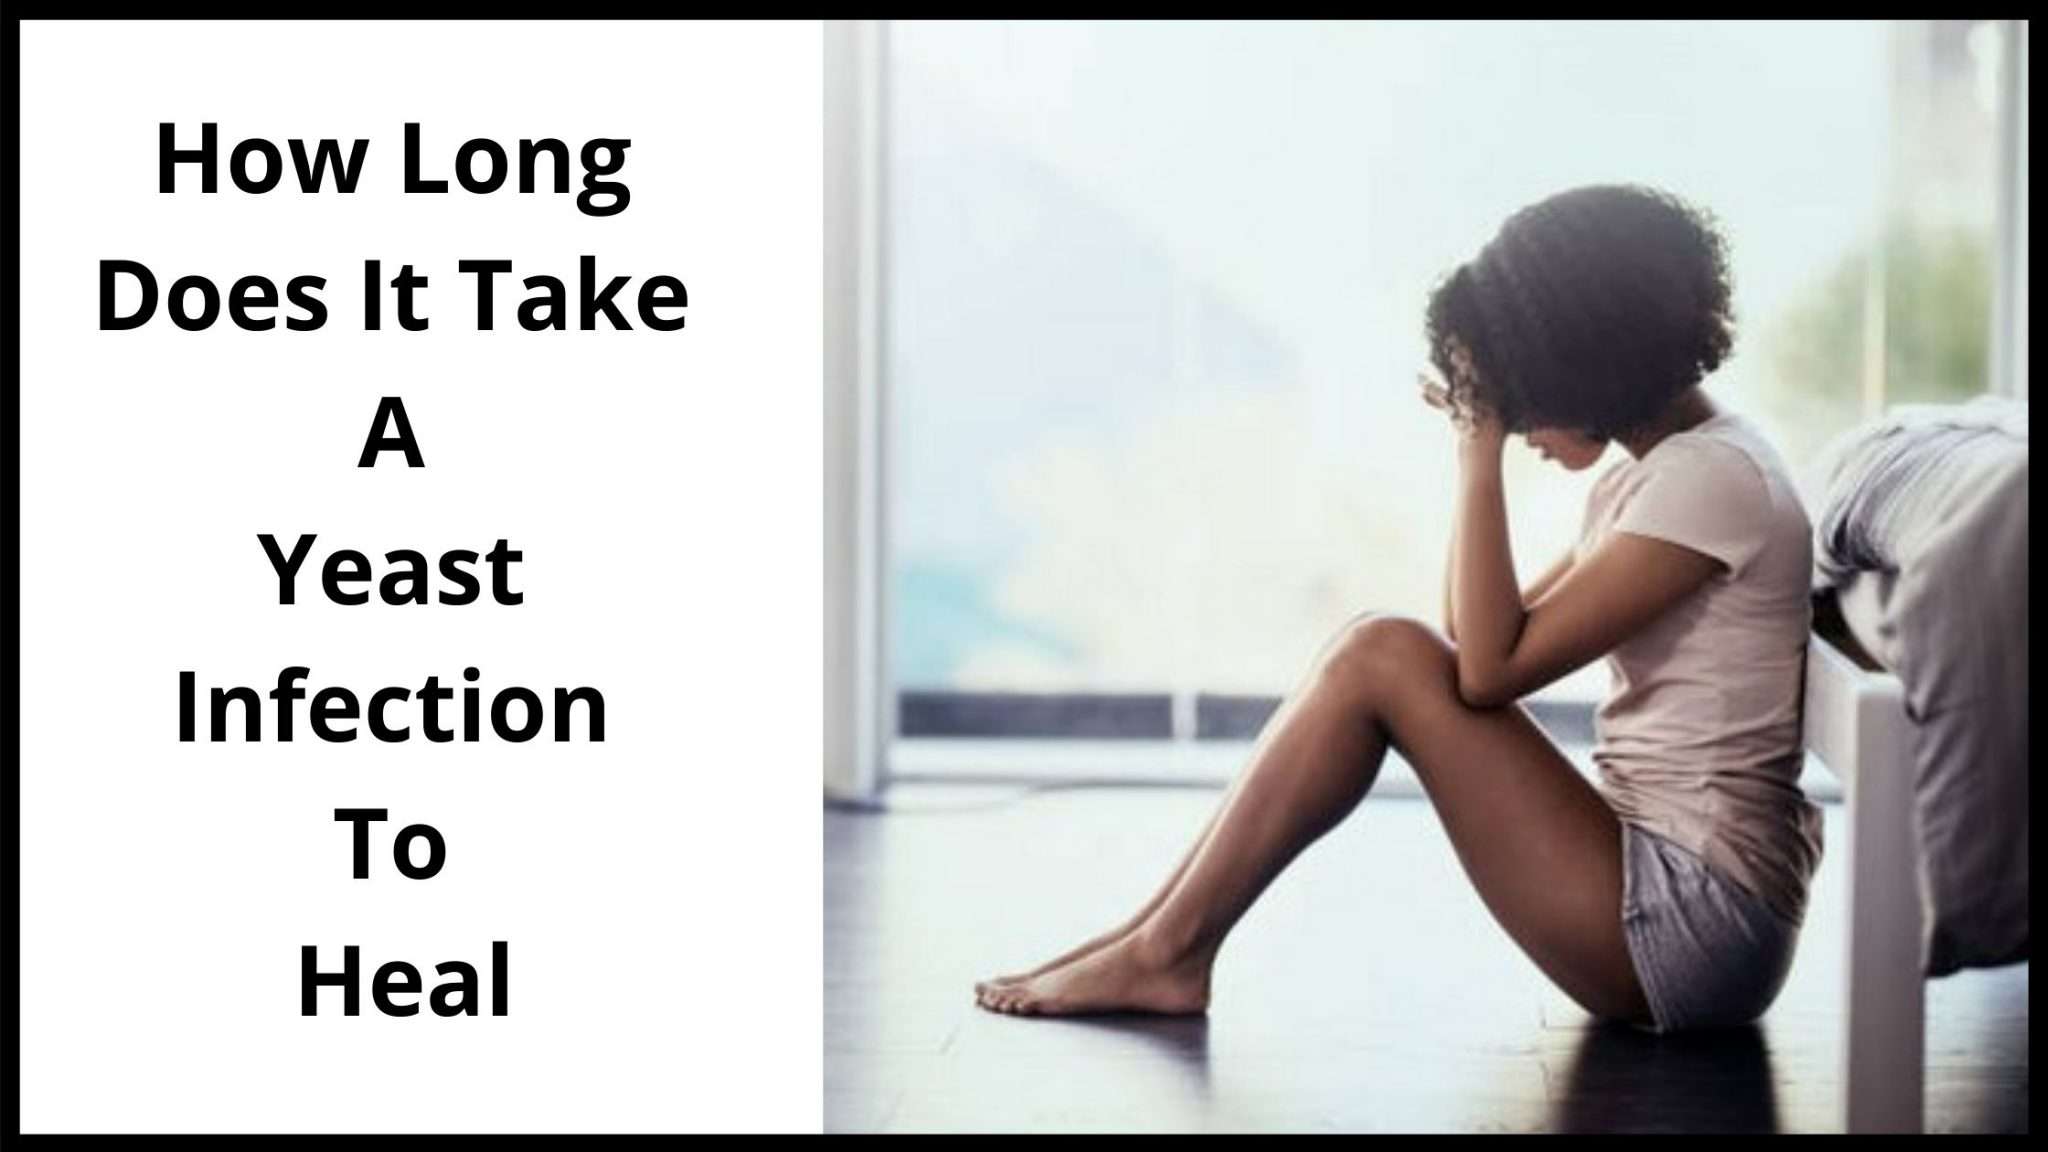 How Long Does It Take A Yeast Infection To Heal